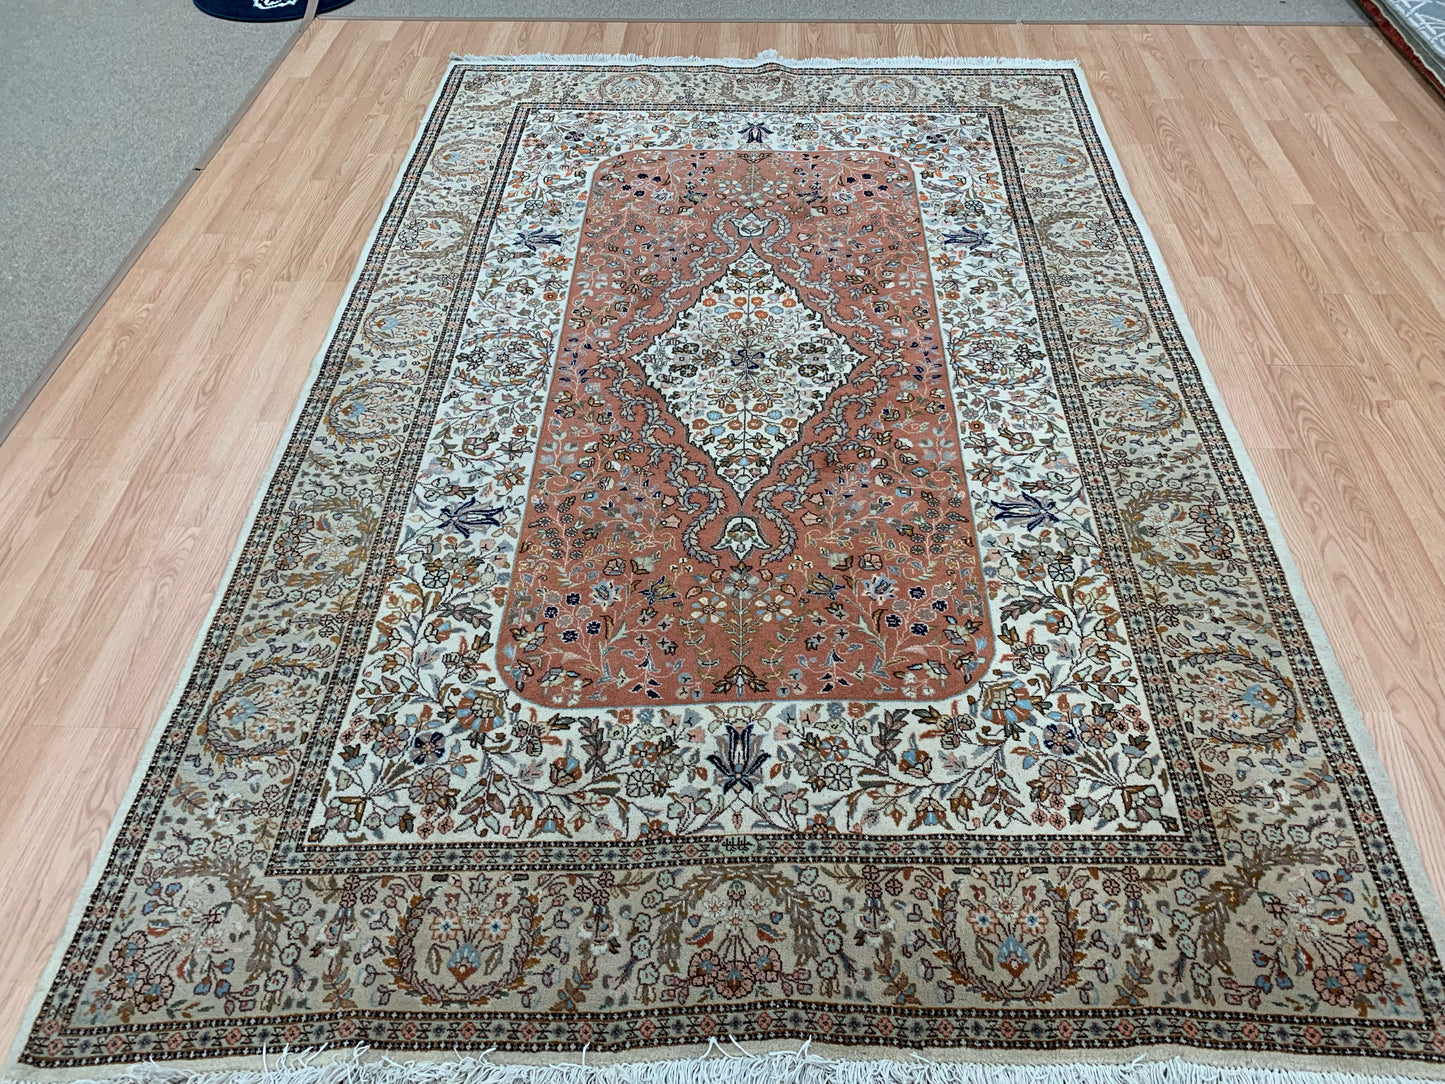 Semi-Antique Hand-Knotted Wool Persian Tabriz Rug (6'7"x9'11")